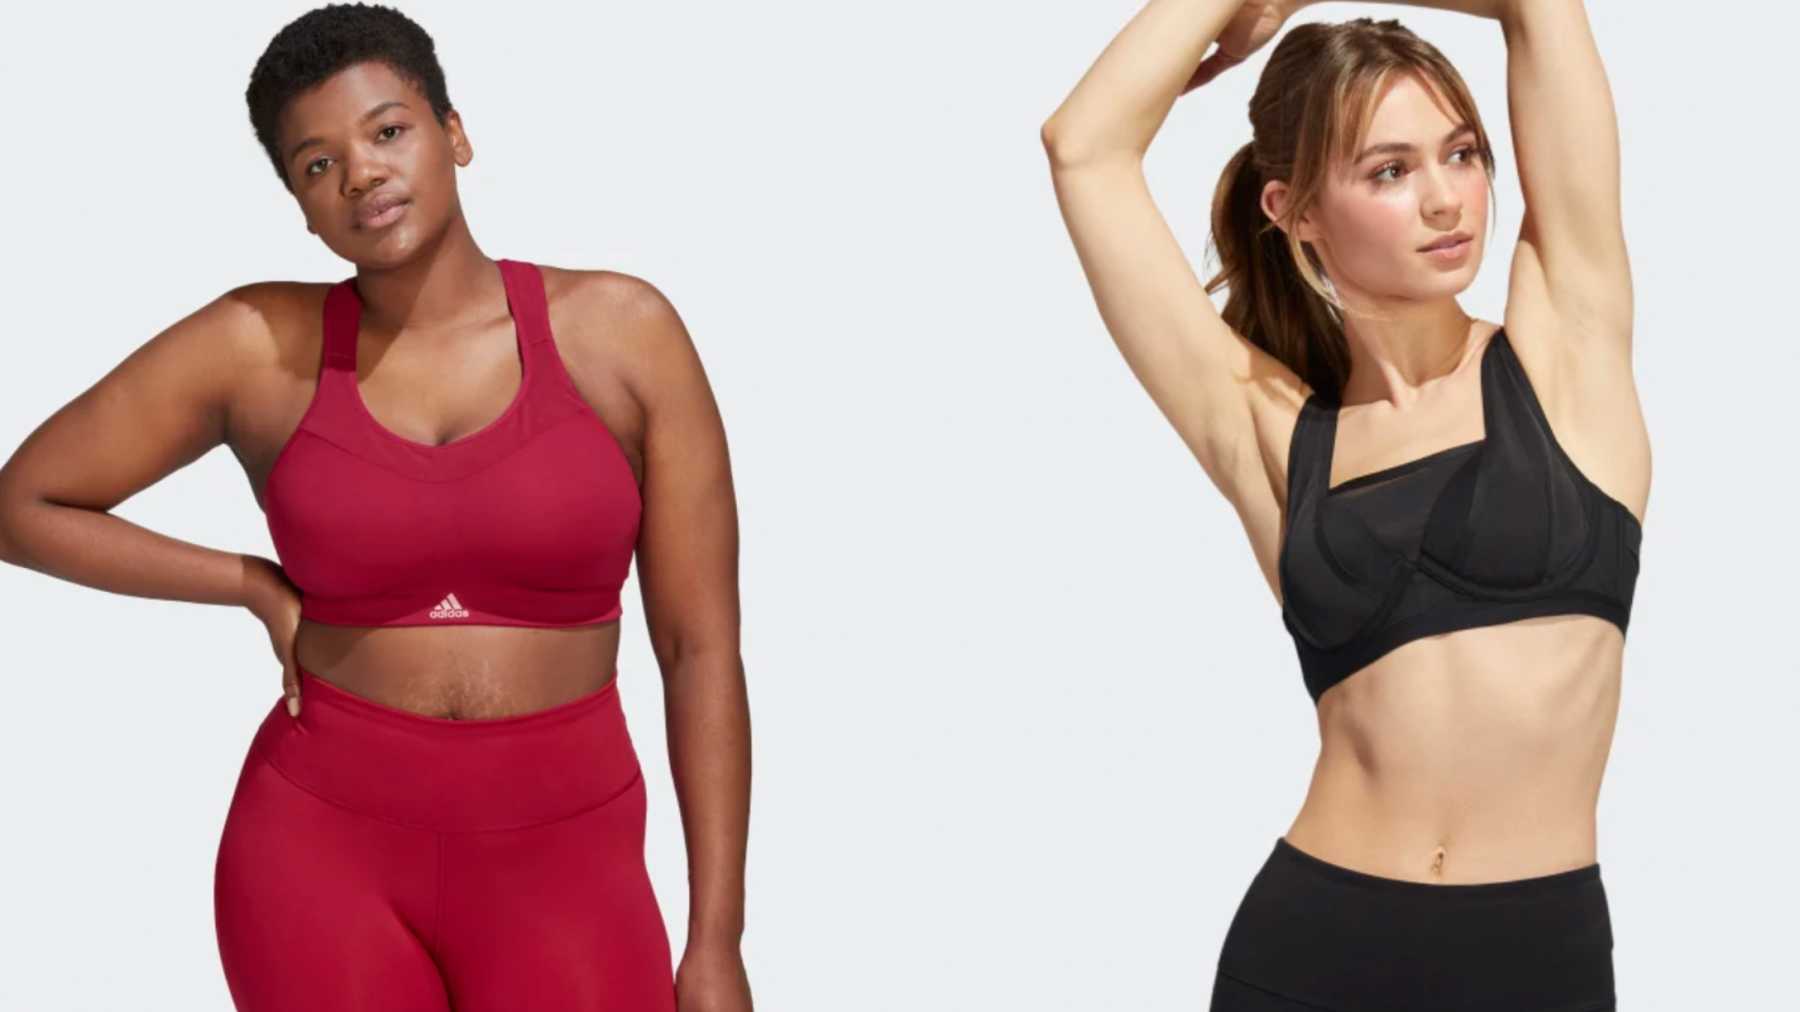 Adidas Shares Image of 25 Women's Bare Breasts to Promote New Sports Bra:  'Support Is Everything